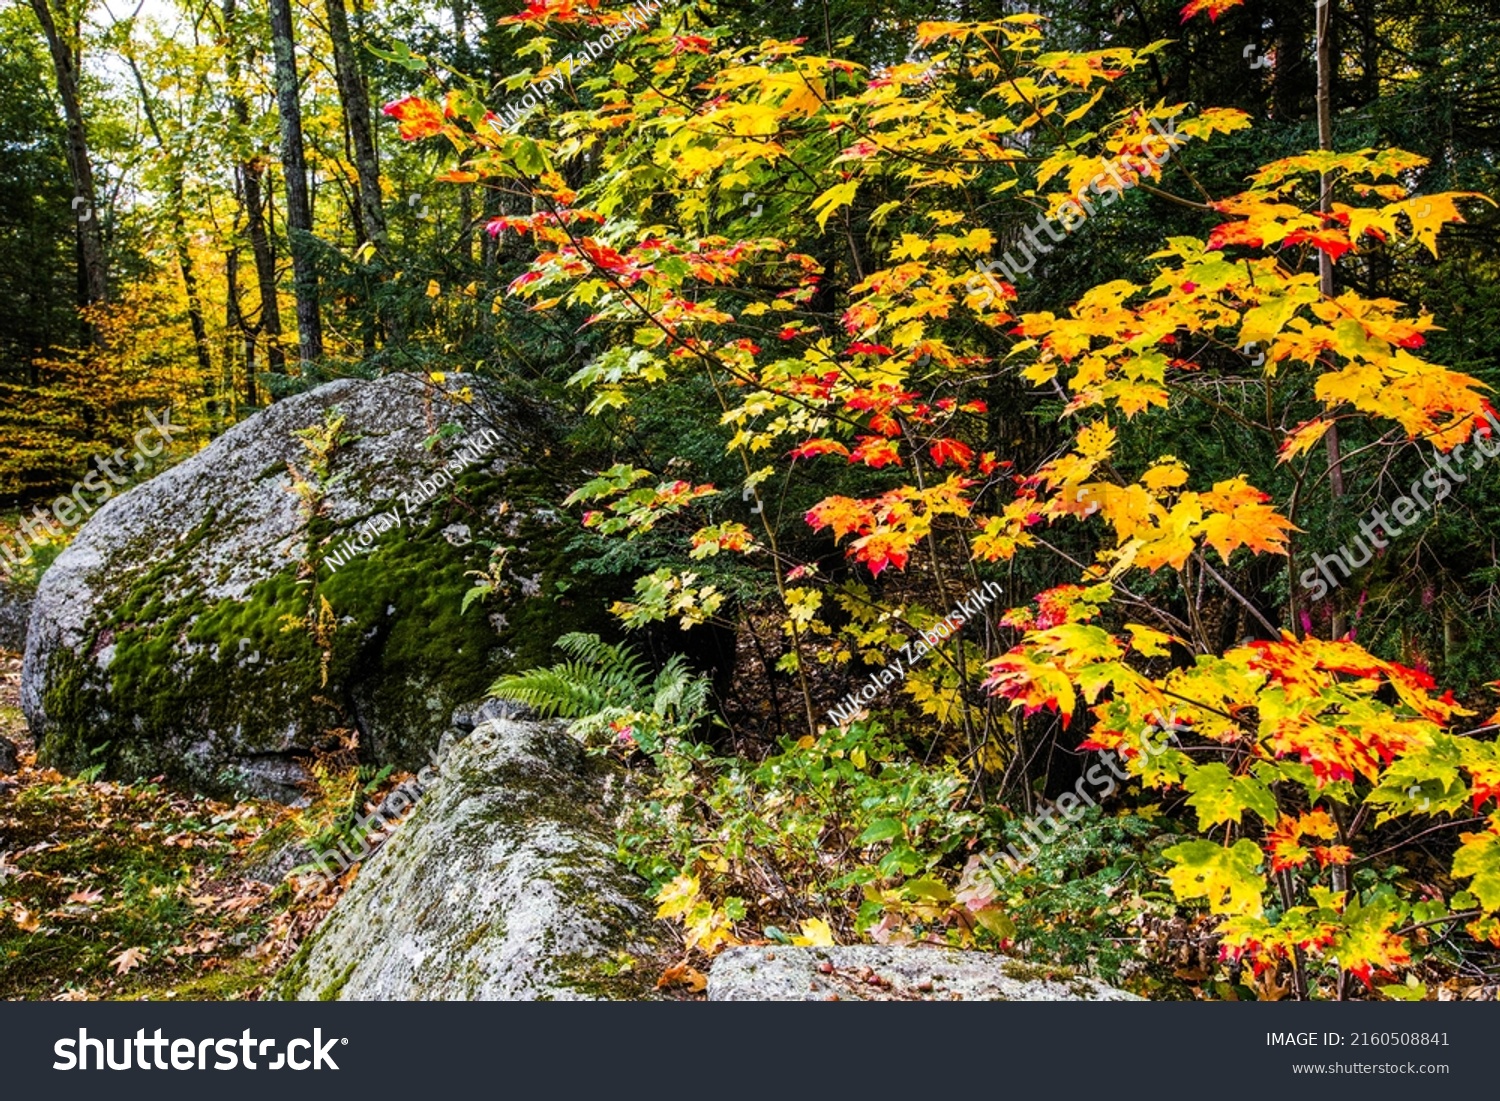 Autumn foliage on forest bushes. Autumn in forest. Forest bush in autumn. Autumn nature scene #2160508841